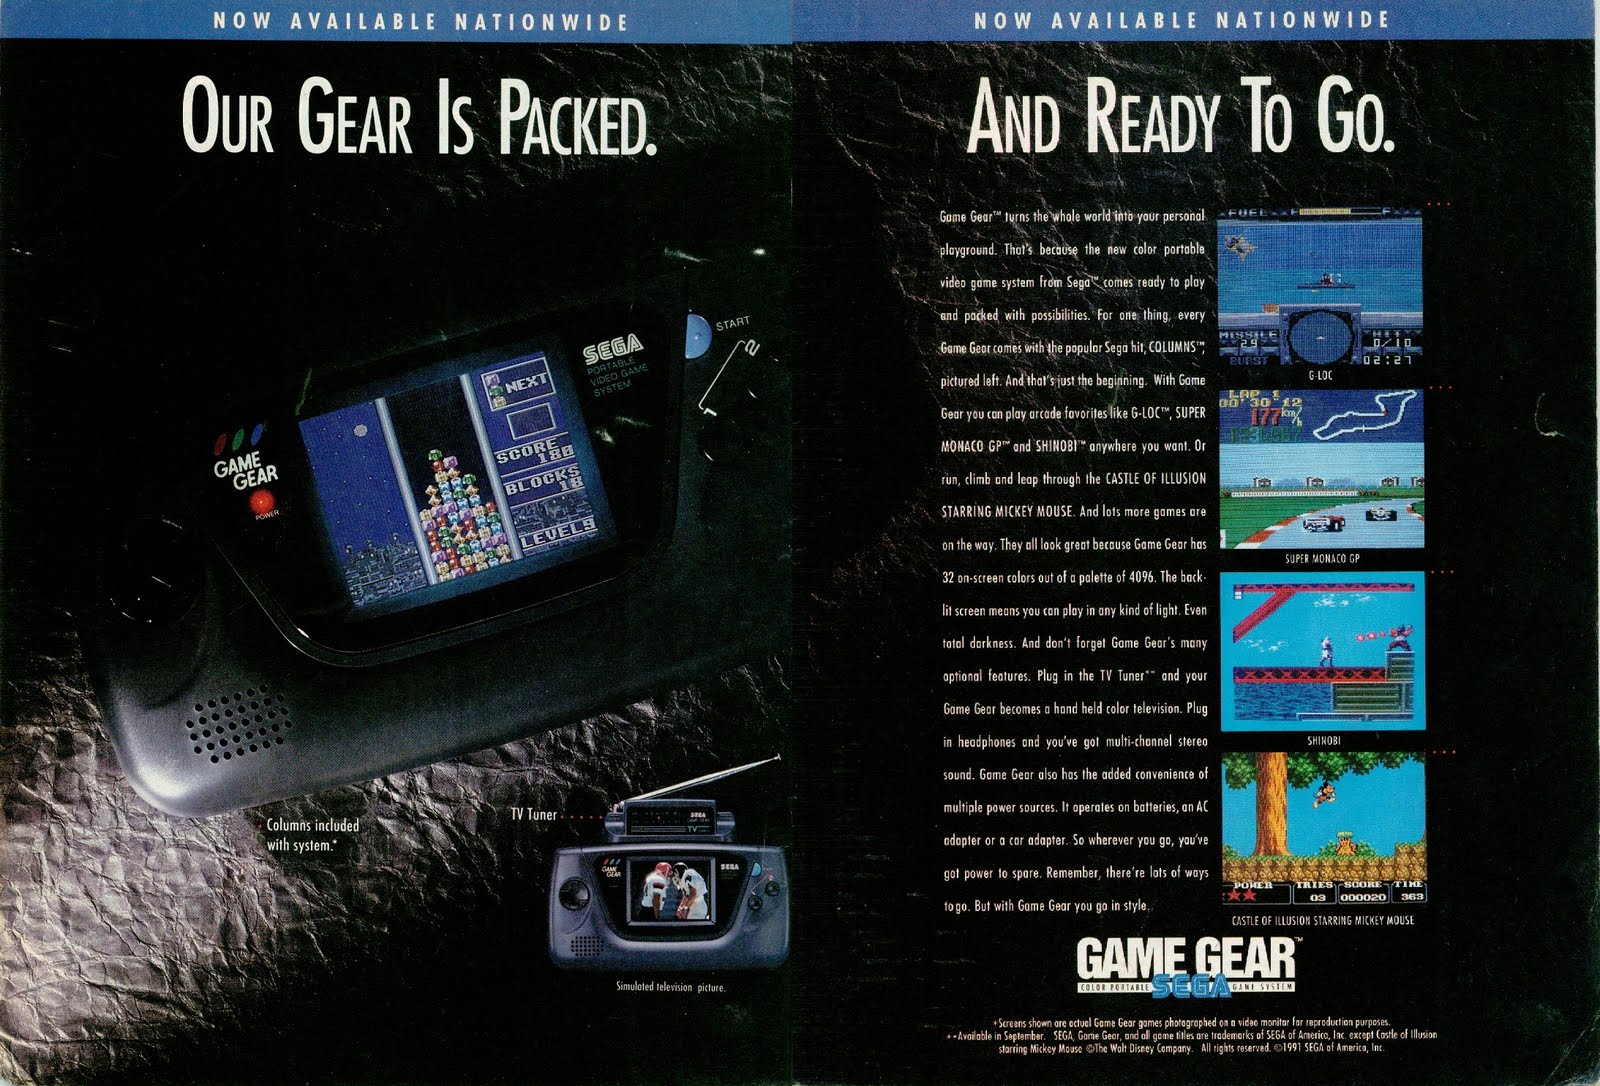 vintage gaming ads - Now Available Nationwide Now Available Nationwide Our Gear Is Packed. And Ready To Go. Game Gear turns the whole world into your personal playground. That's because the new color portable Start Sega GLoc Portable Video Game System vid